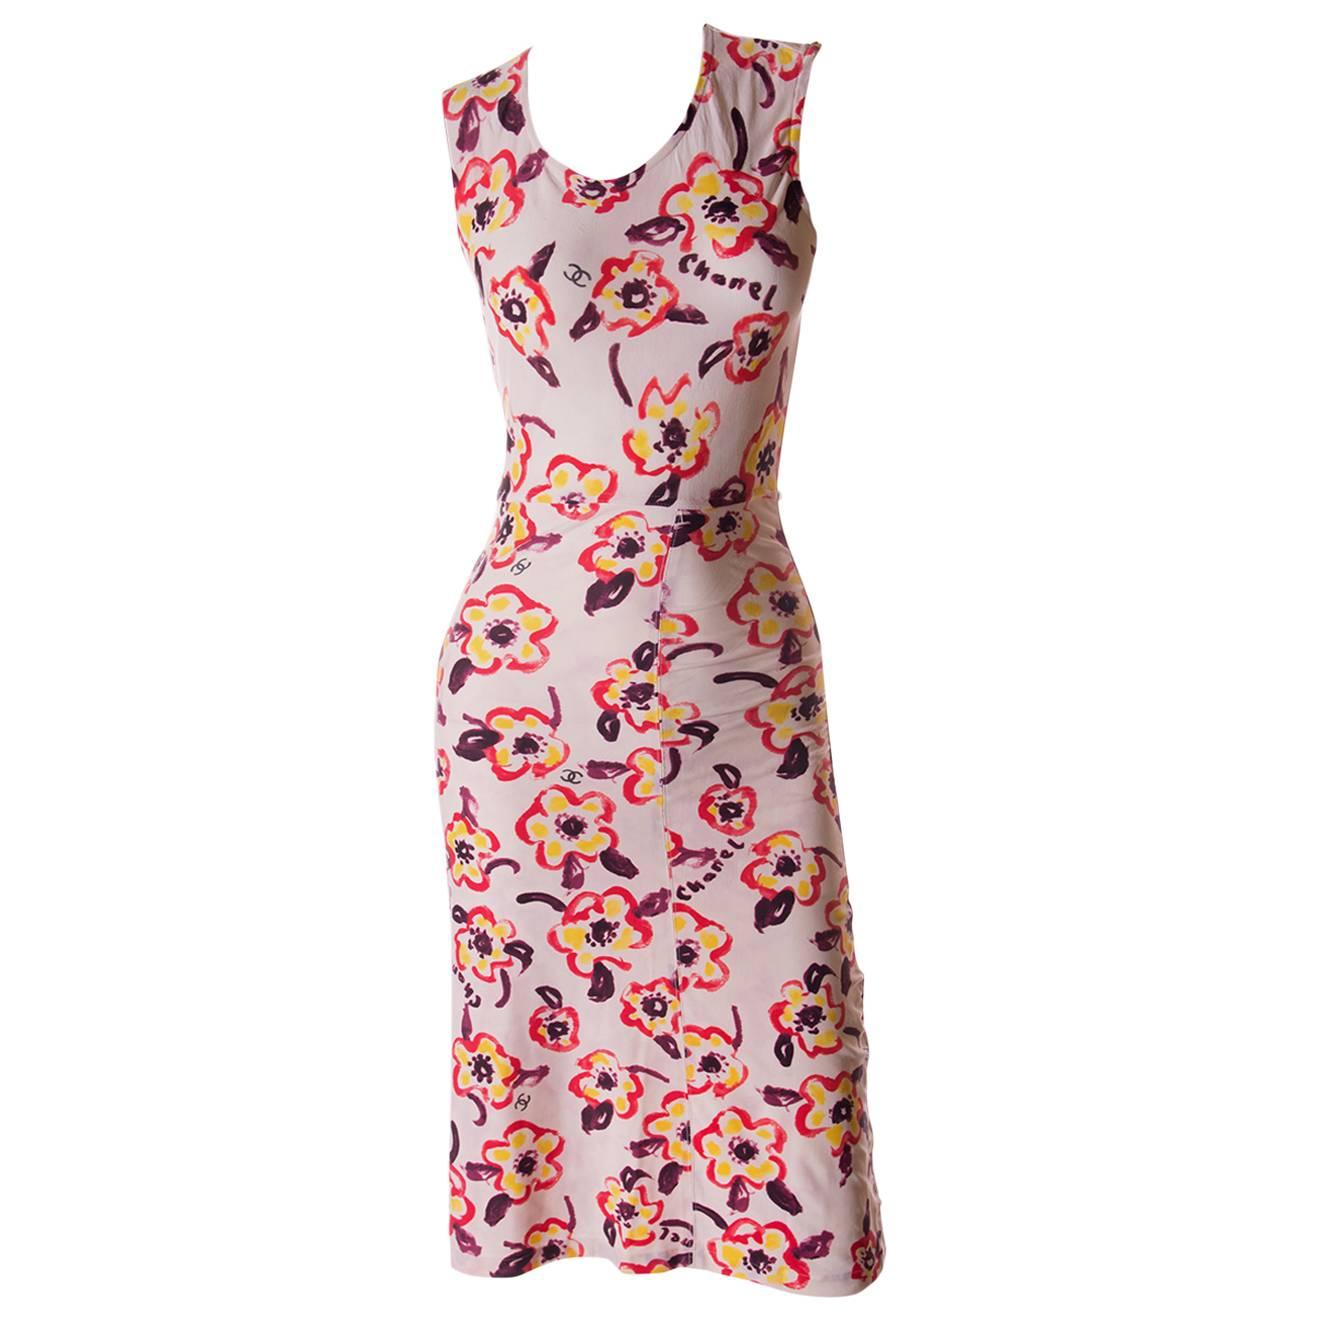 Chanel 1996 Iconic Camellia Print Dress For Sale